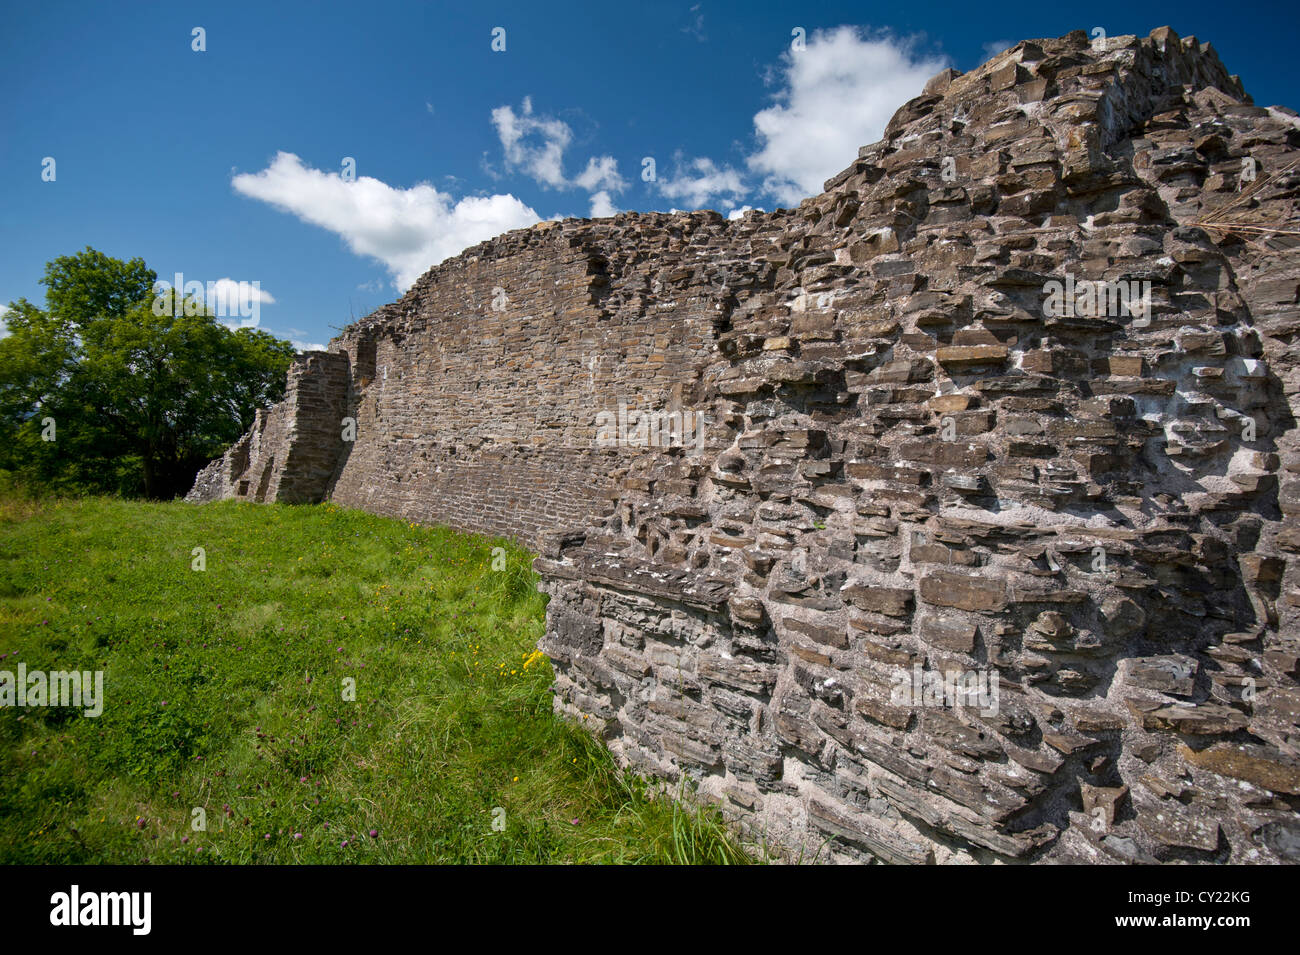 Dolforwyn Castle, recently excavated ruins in Powys, Montgomeryshire. Mid Wales.  SCO 8707 Stock Photo